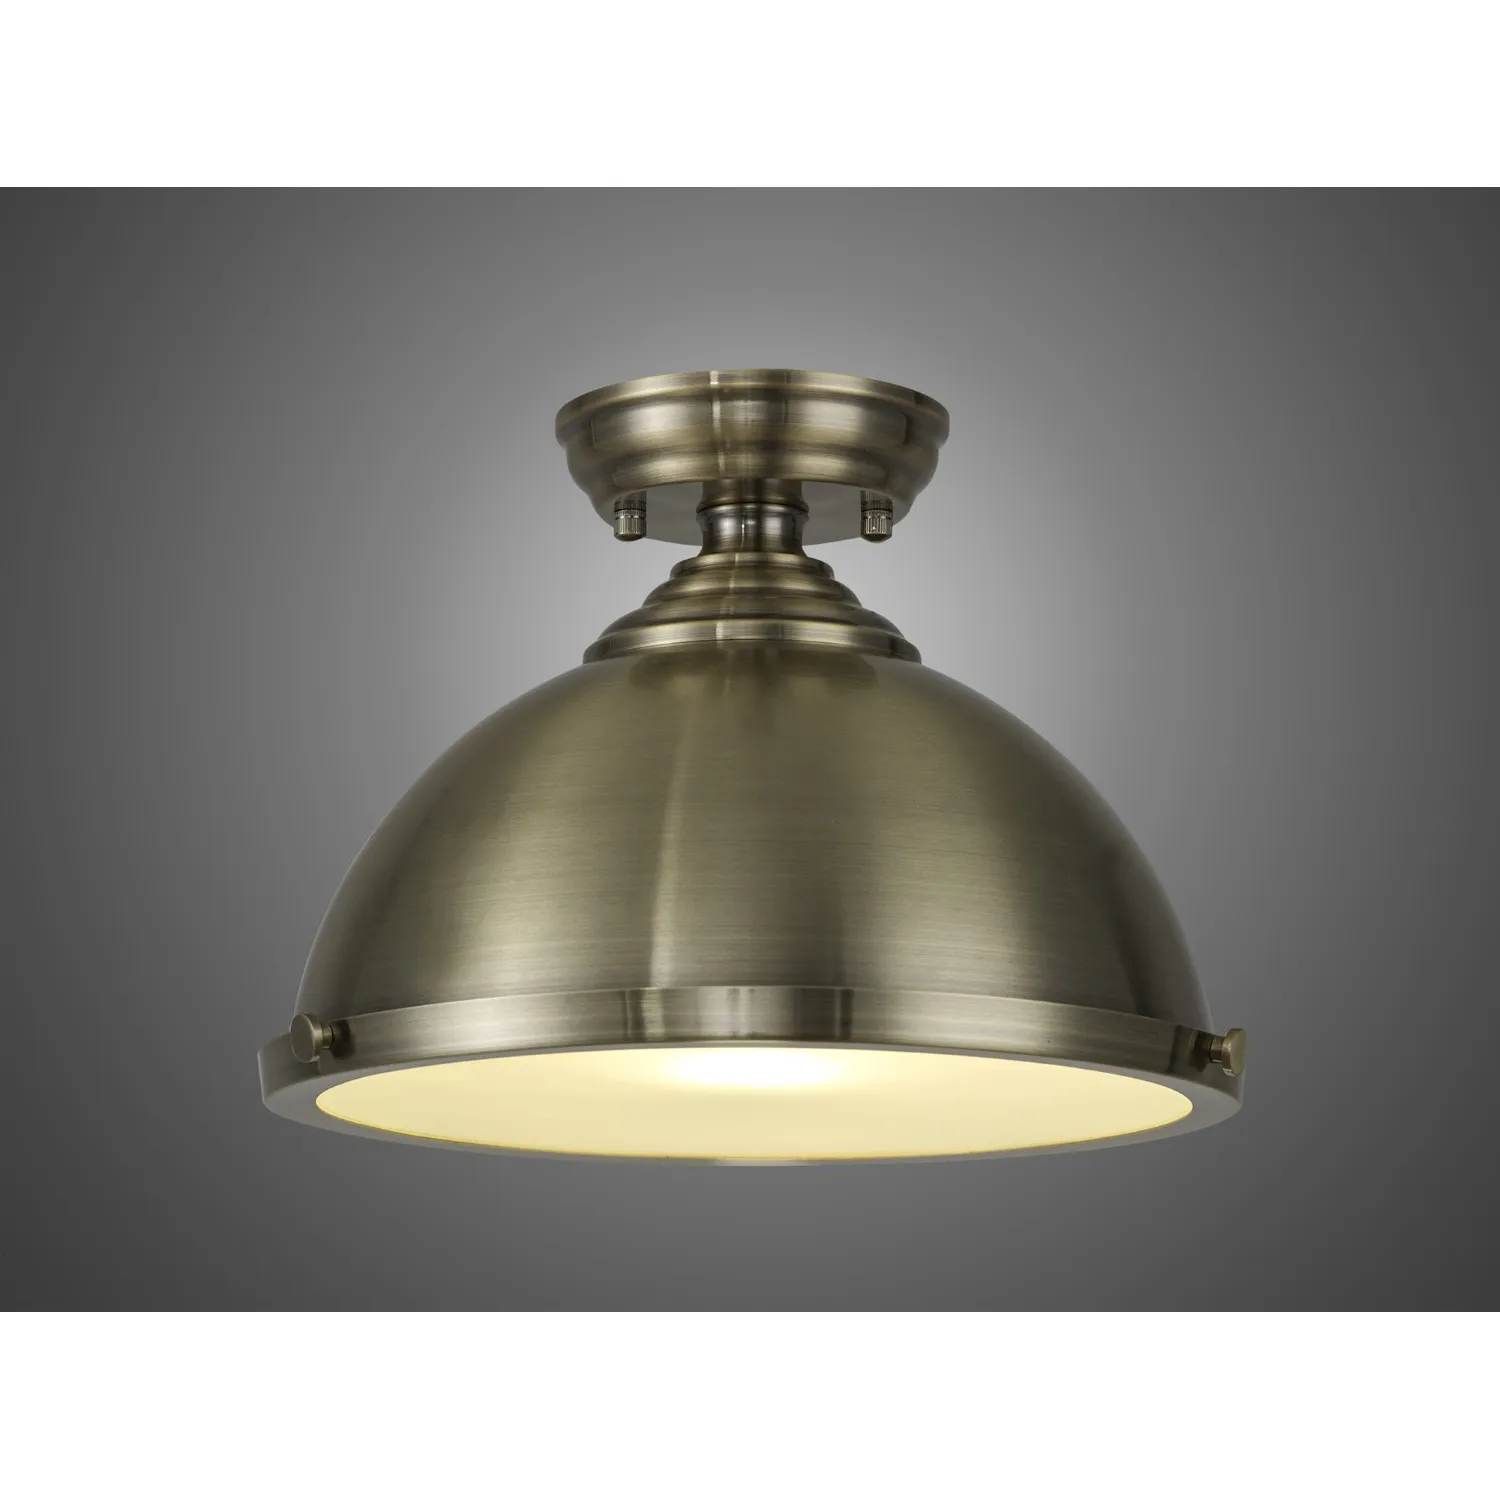 Billericay 1 Light Flush Ceiling E27 With Round 31cm Metal Shade Antique Brass Frosted White